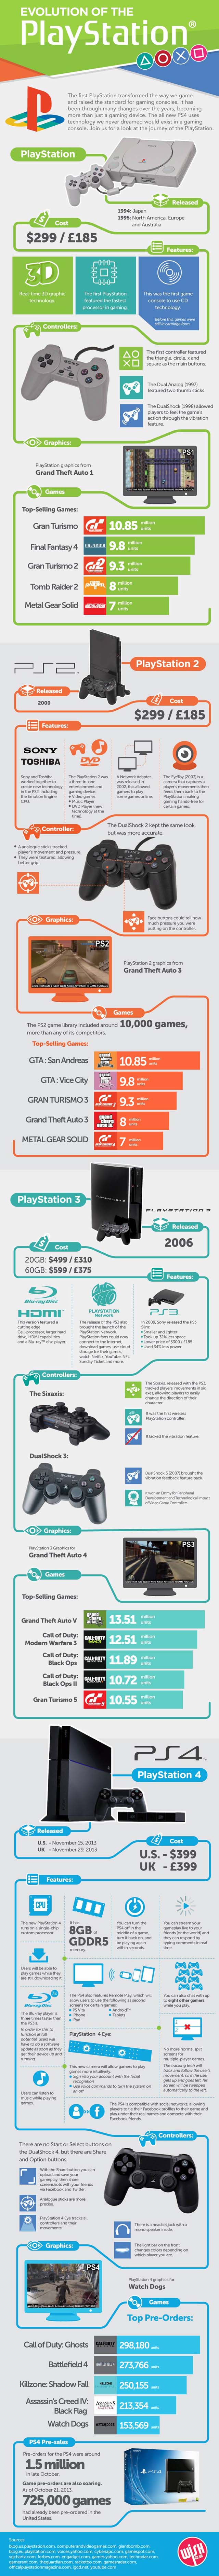 Playstation Infographic